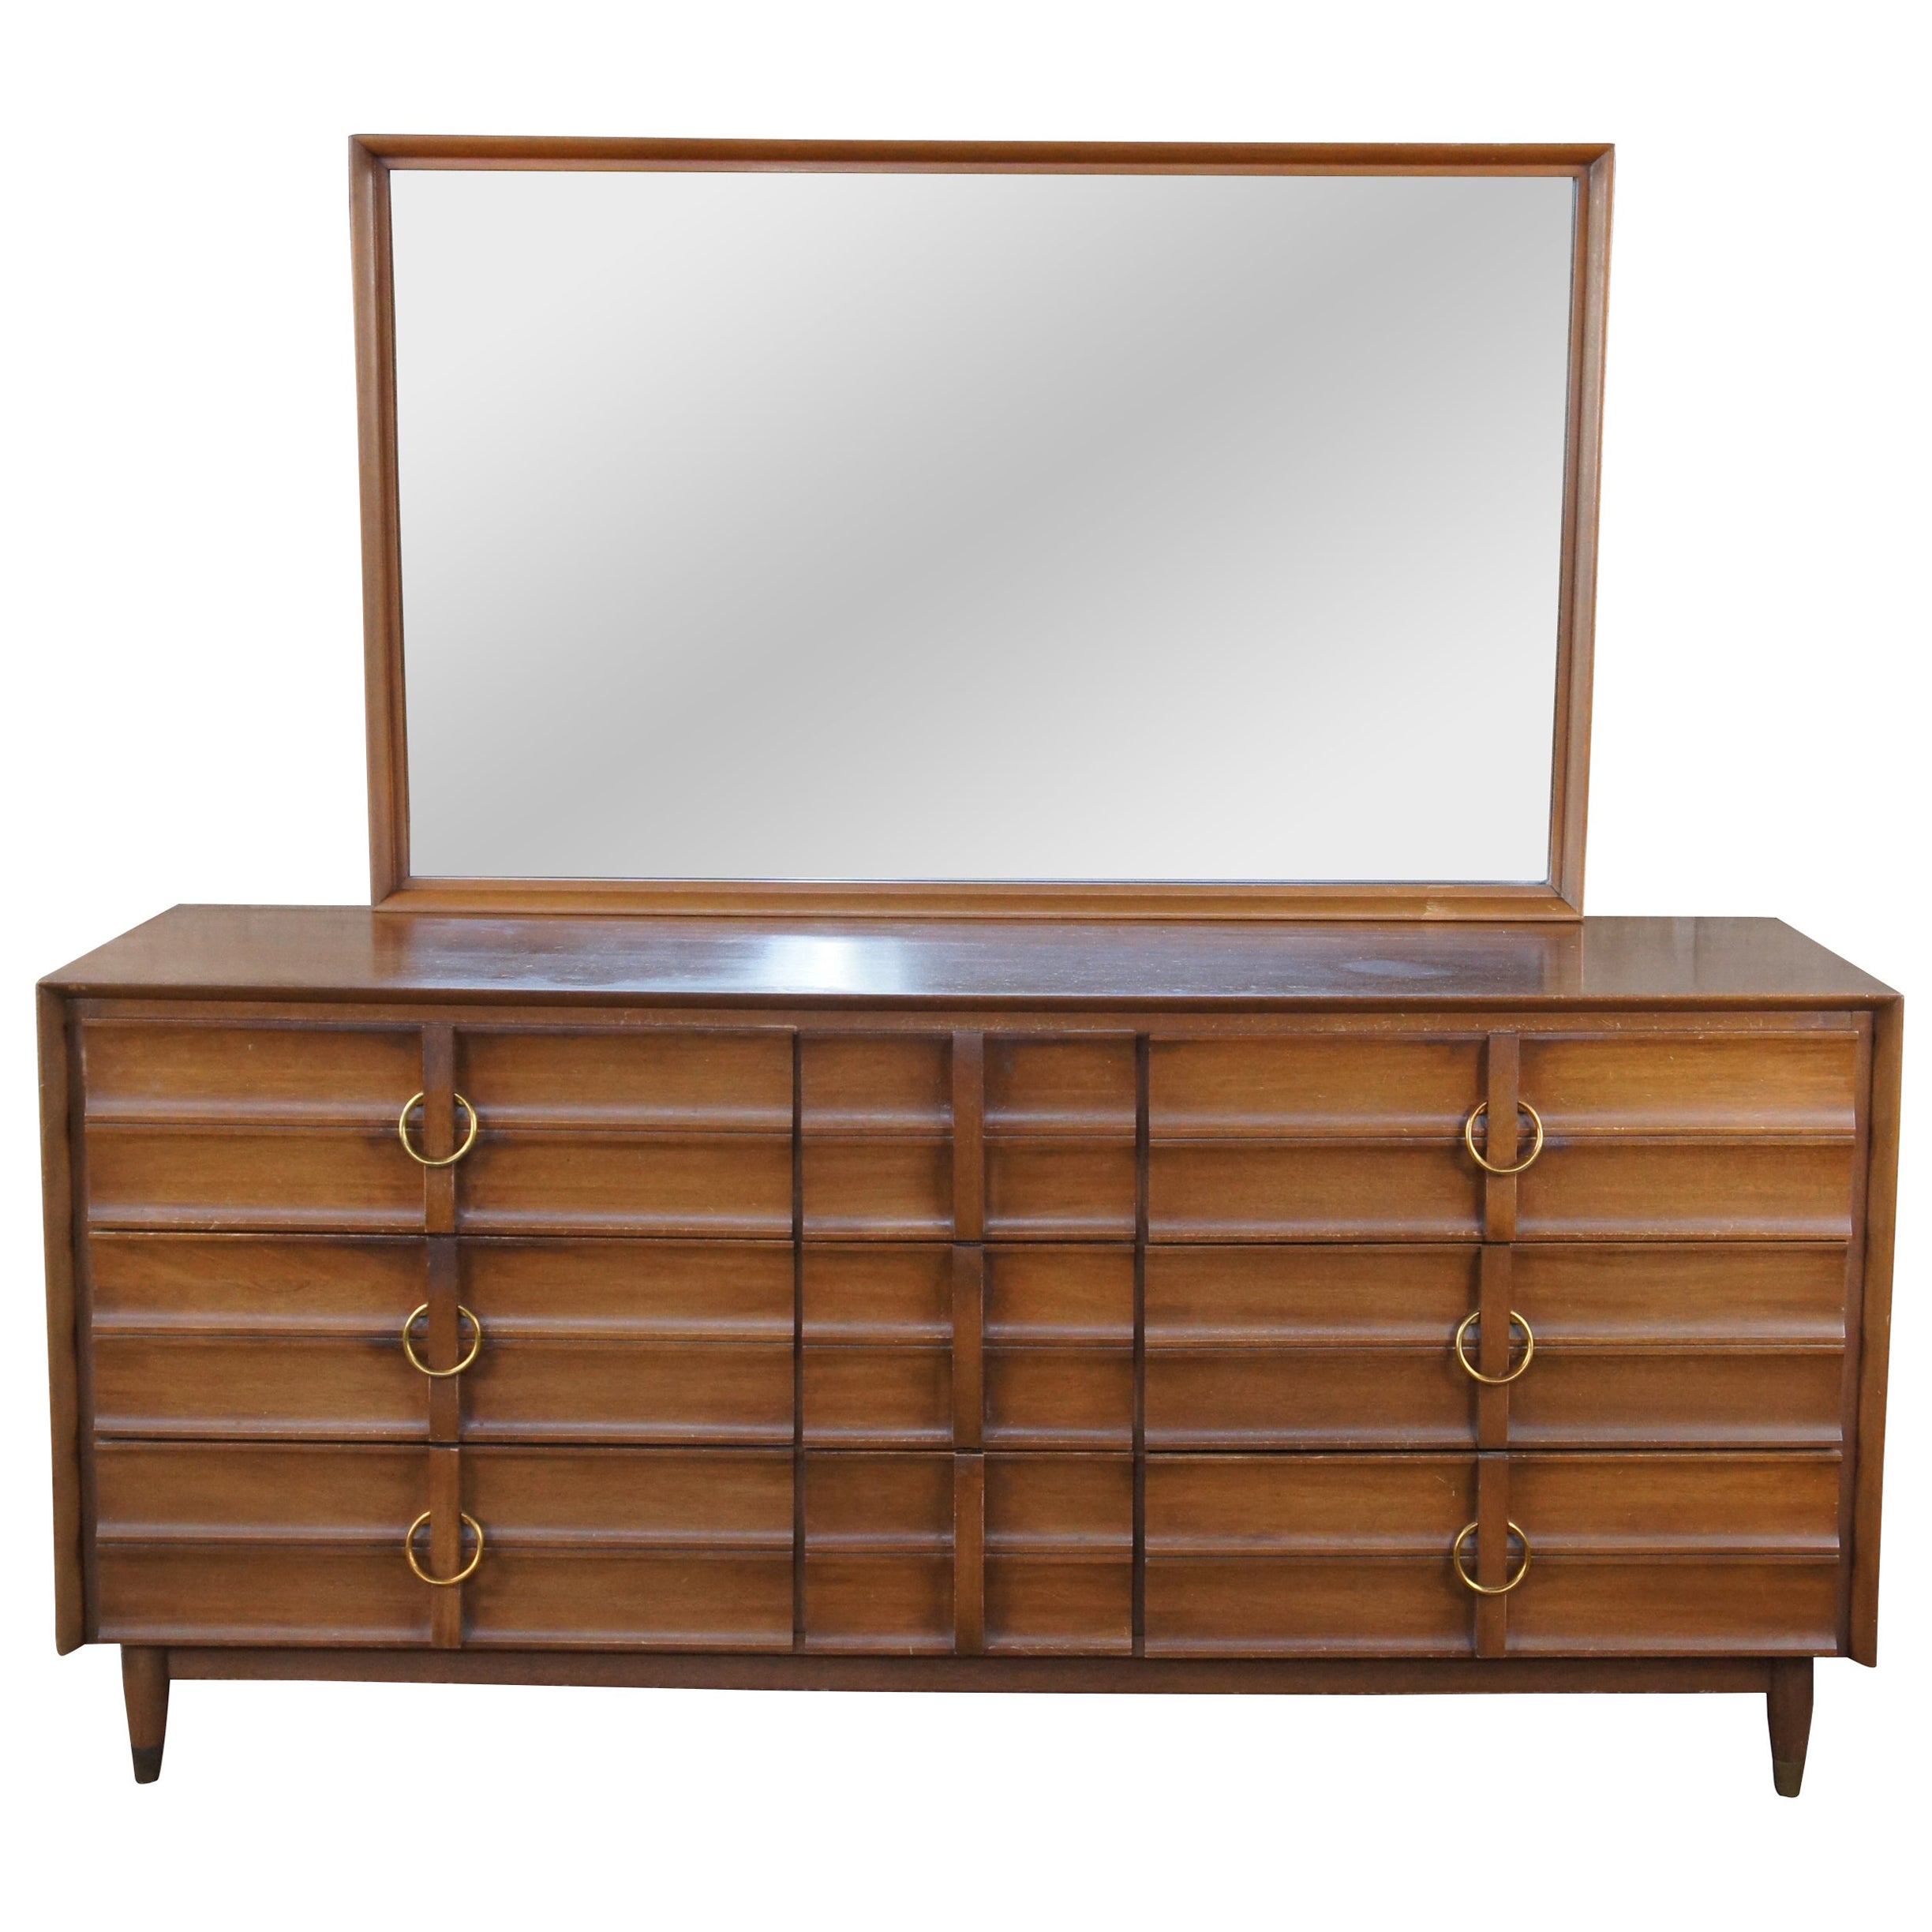 Hungerford Mid Century Modern Mahogany Dresser Chest of Drawers w Mirror 64"